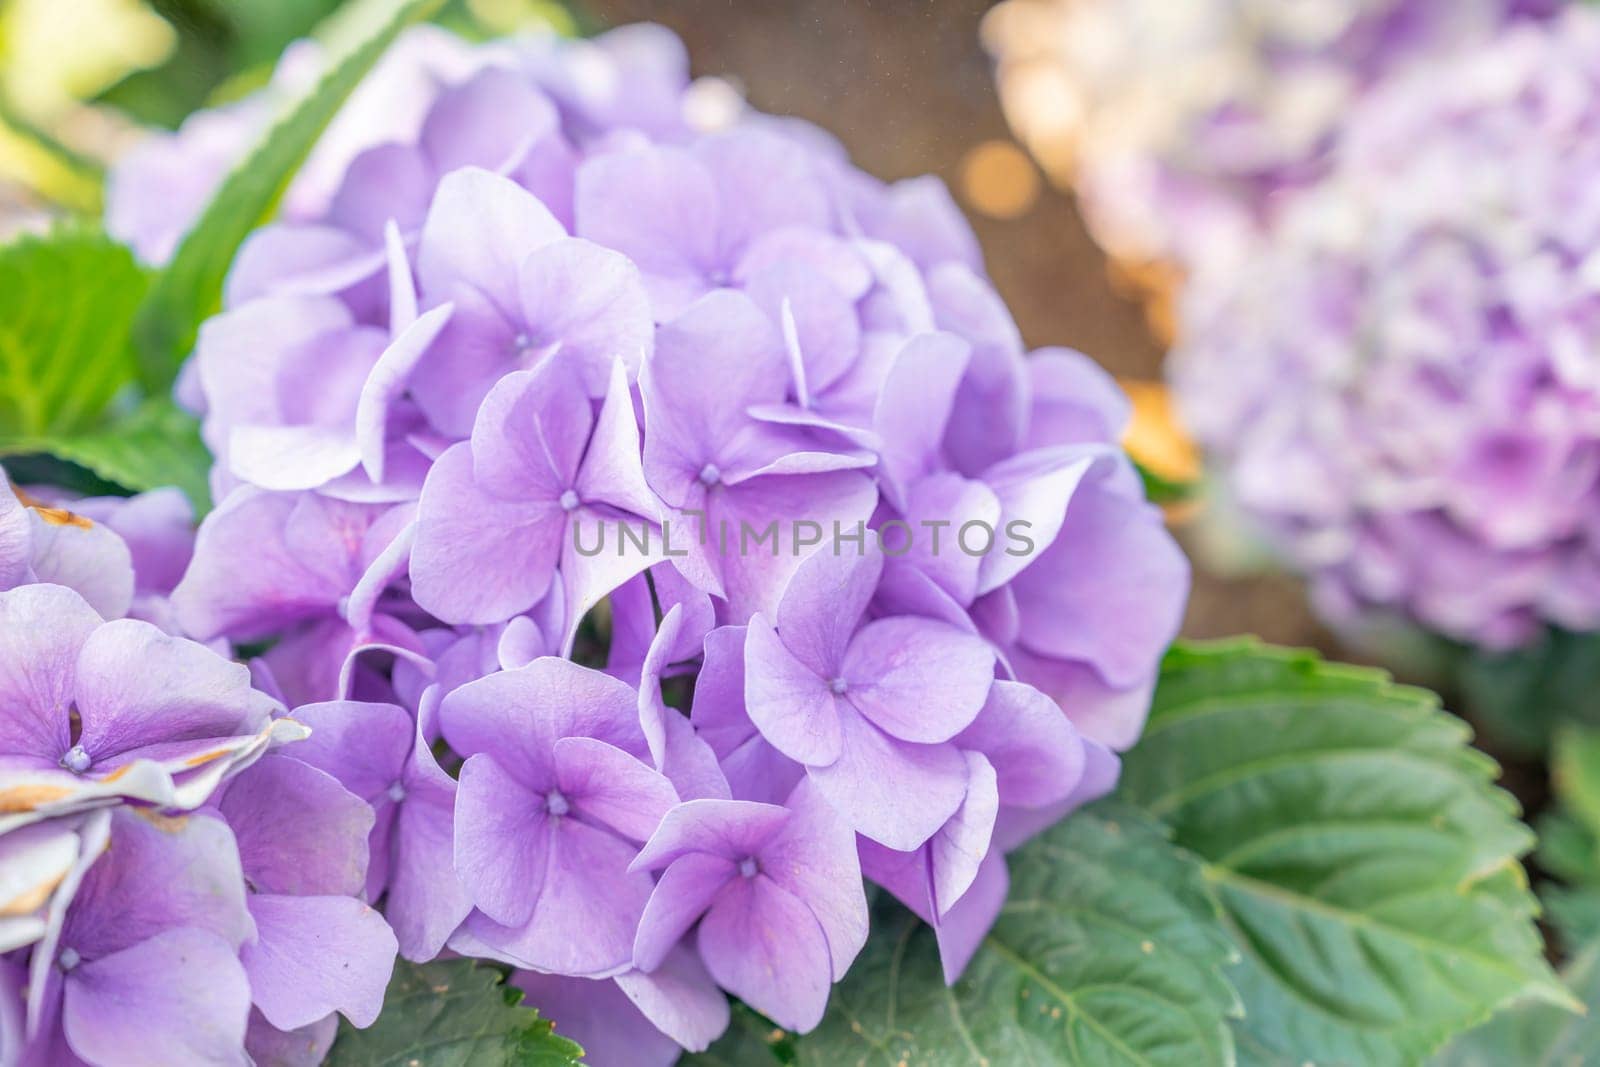 Blooming lilac and light blue hydrangea flowers. Close up photo of beautiful flowers in garden.